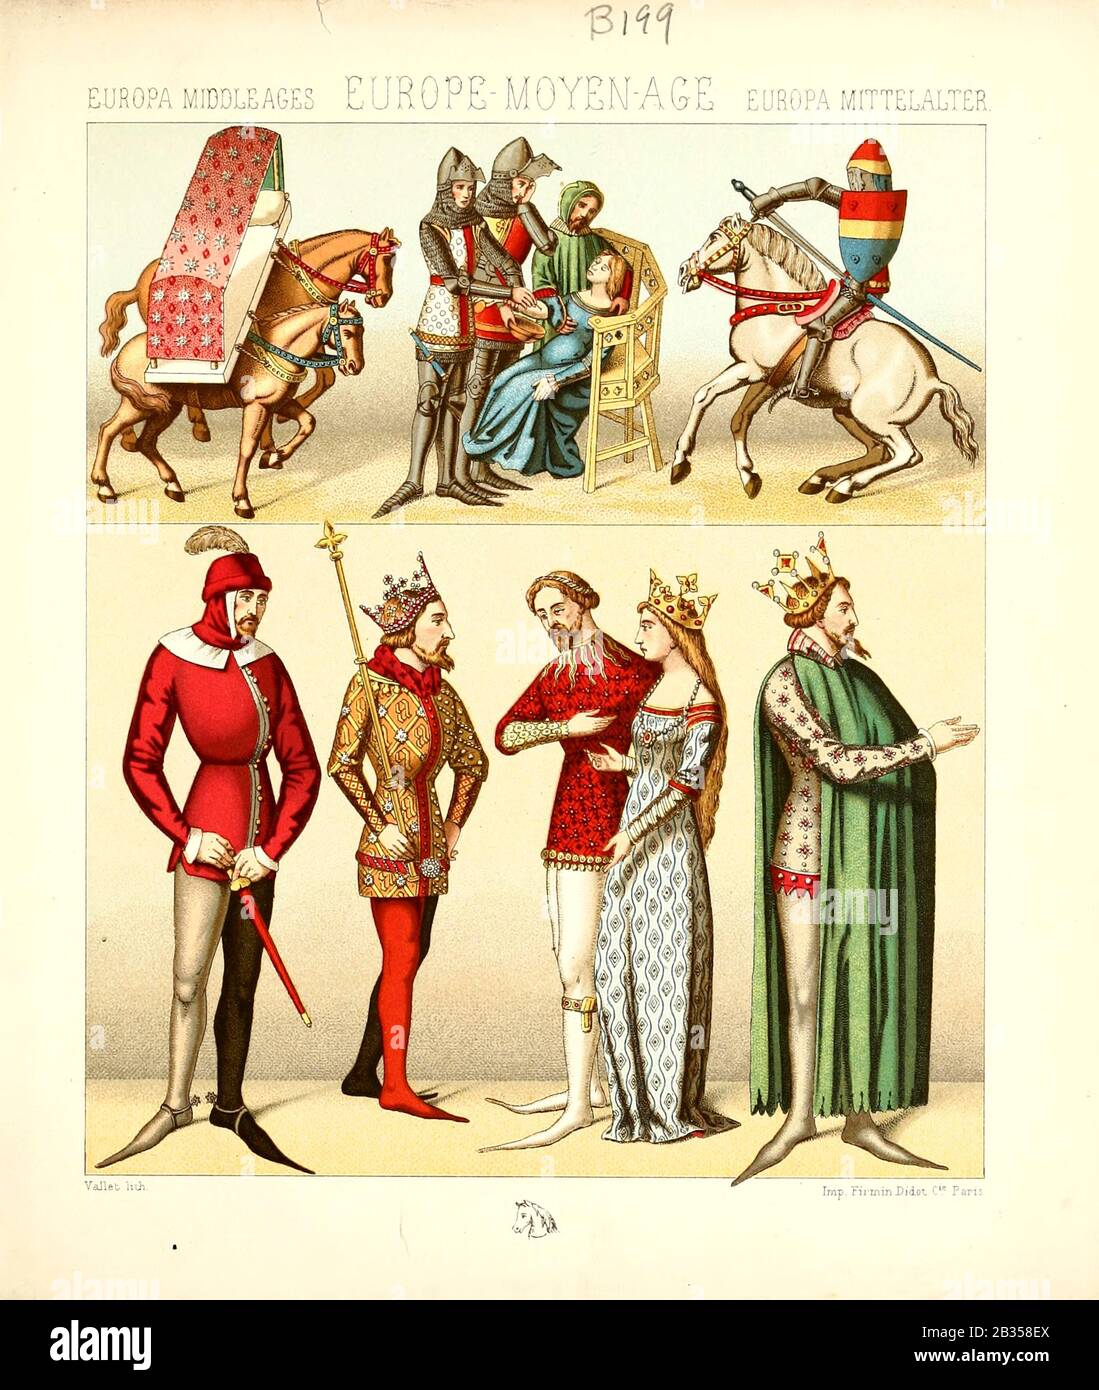 Ancient European fashion and lifestyle, Middle Ages from Geschichte des ...